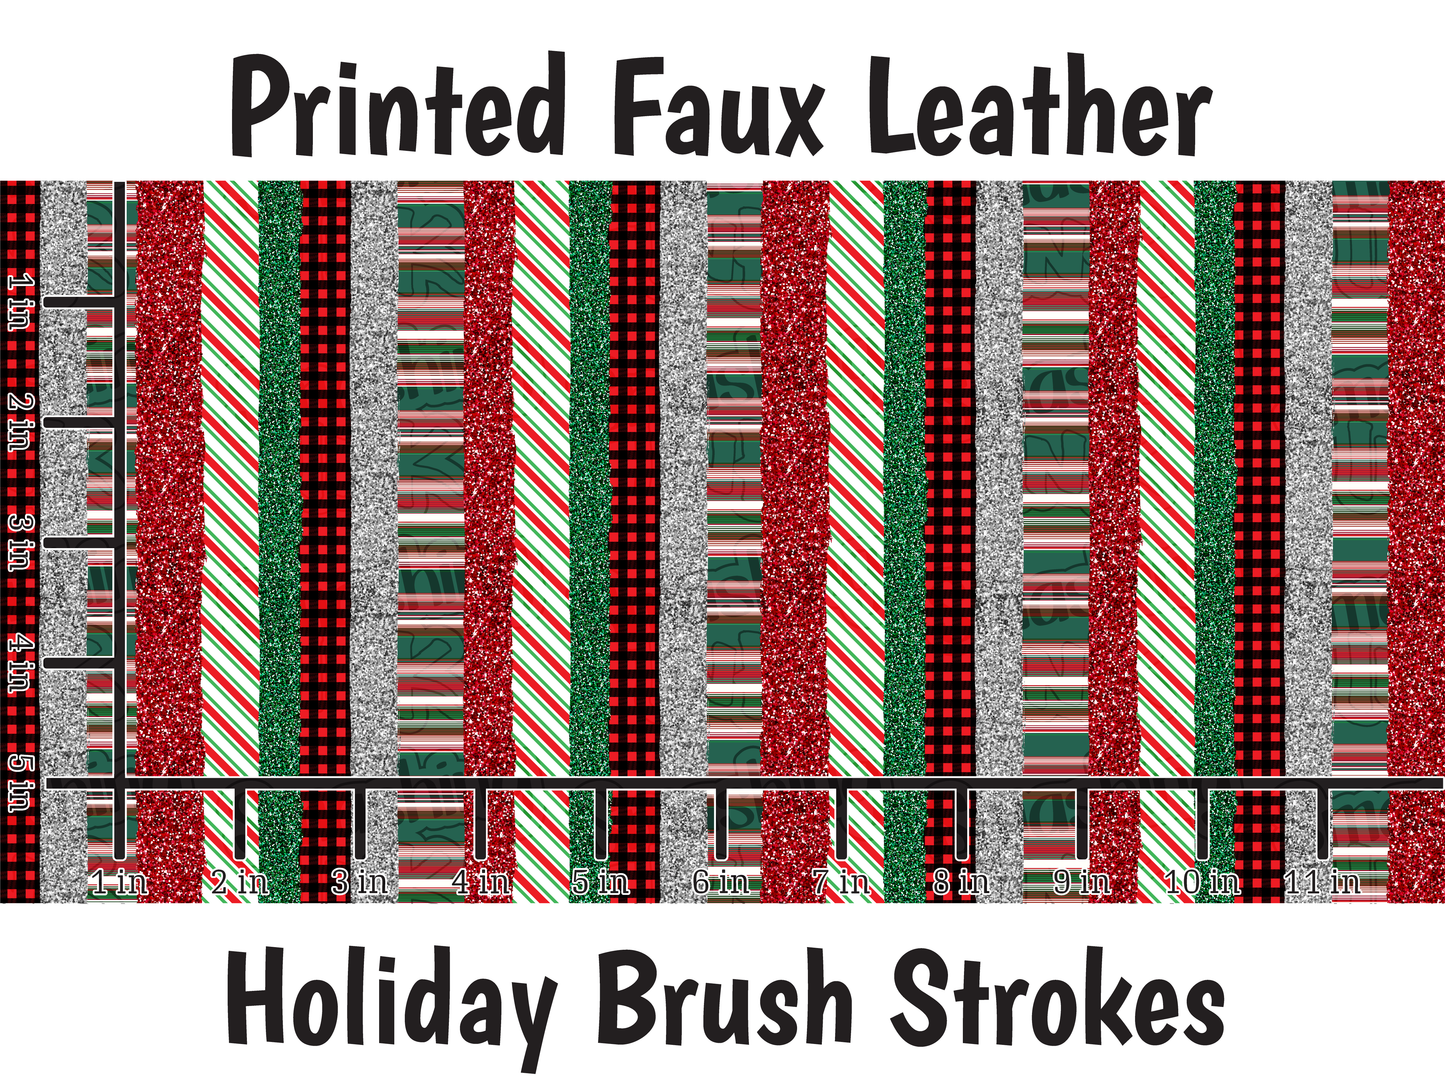 Holiday Brush Strokes - Faux Leather Sheet (SHIPS IN 3 BUS DAYS)